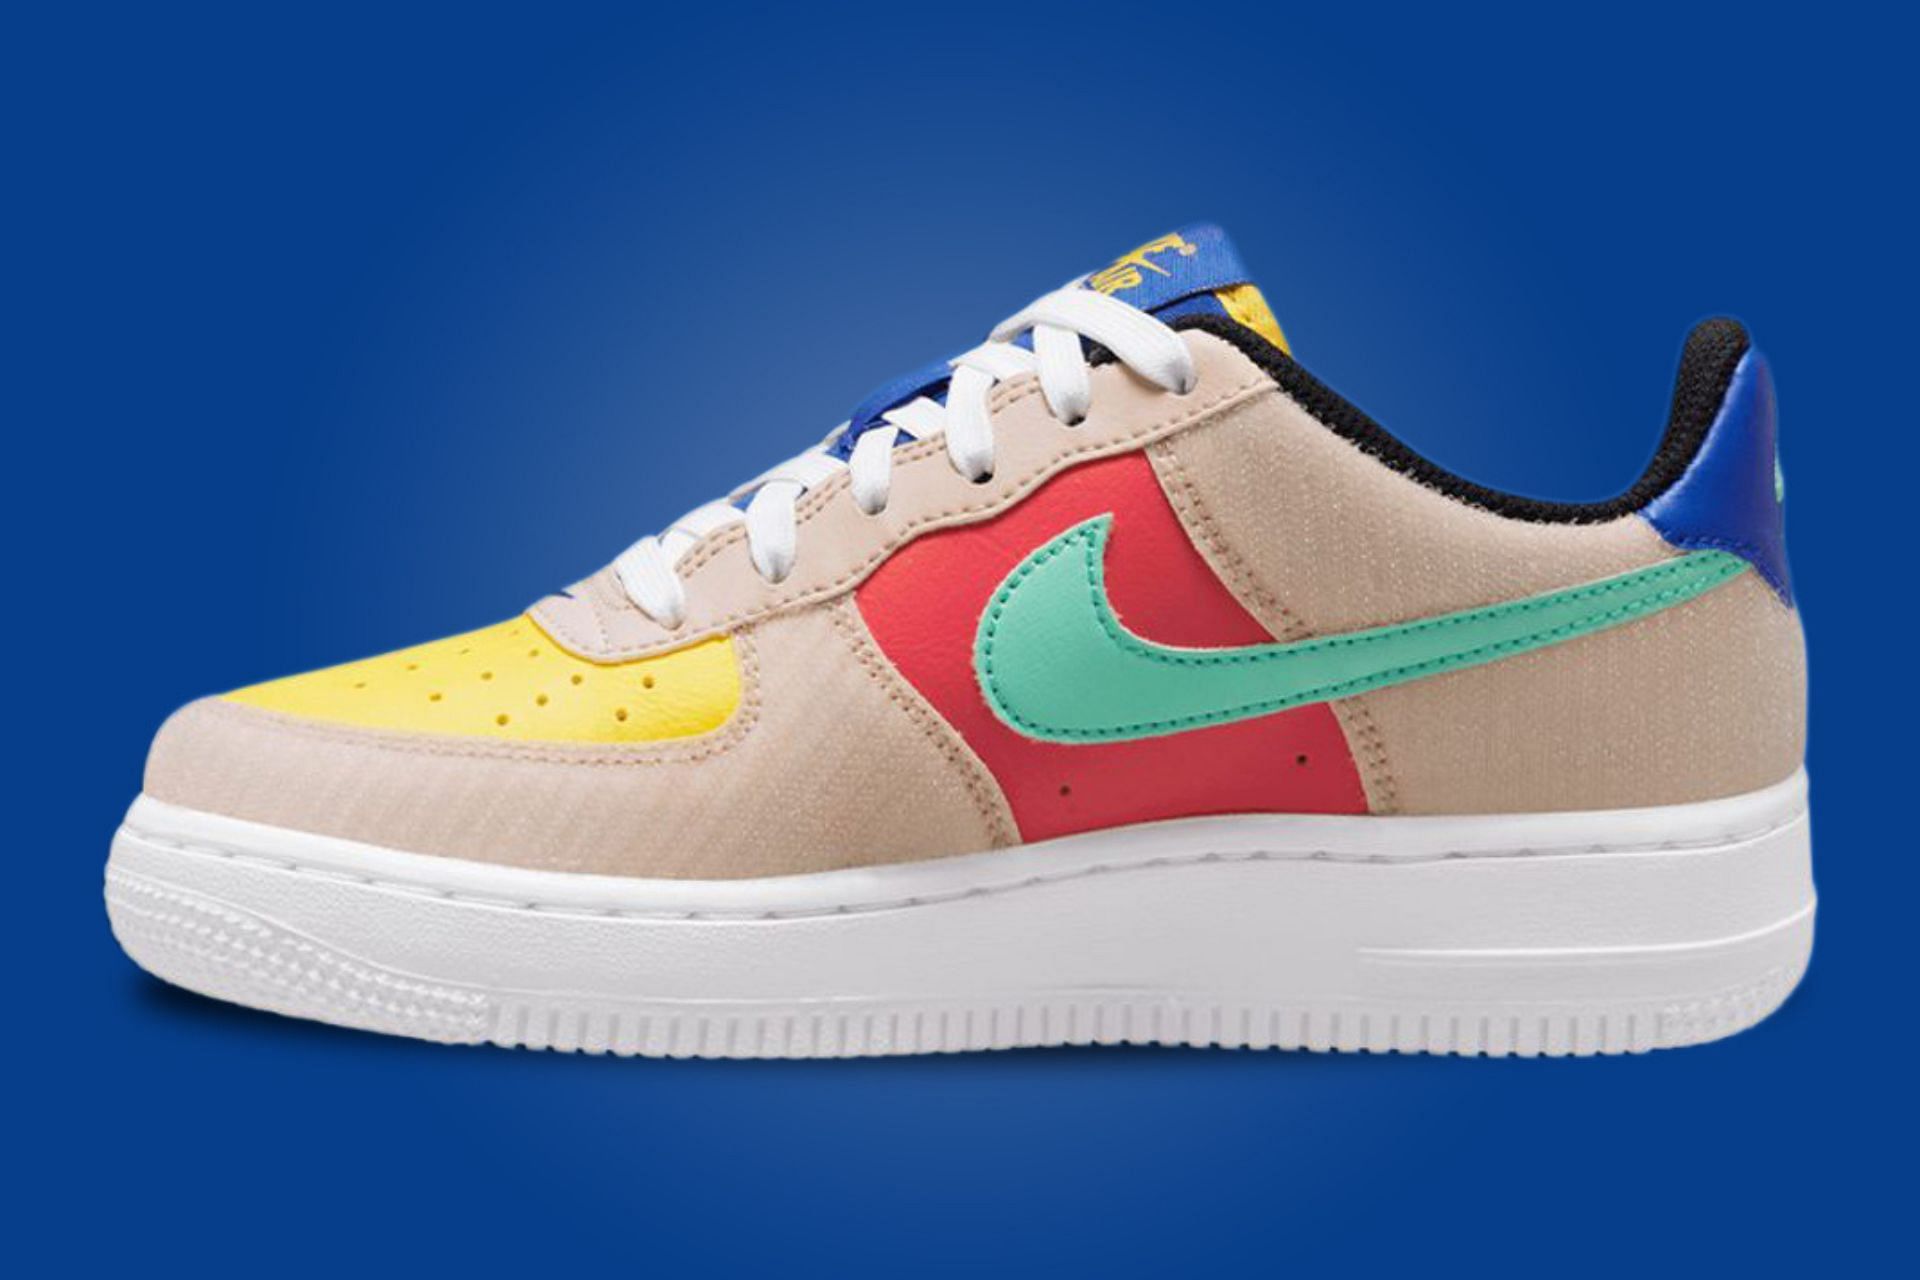 Doe mee Banyan eetbaar Nike Air Force 1 Low “Velcro Multi-Color” shoes: Where to buy and more  details explored